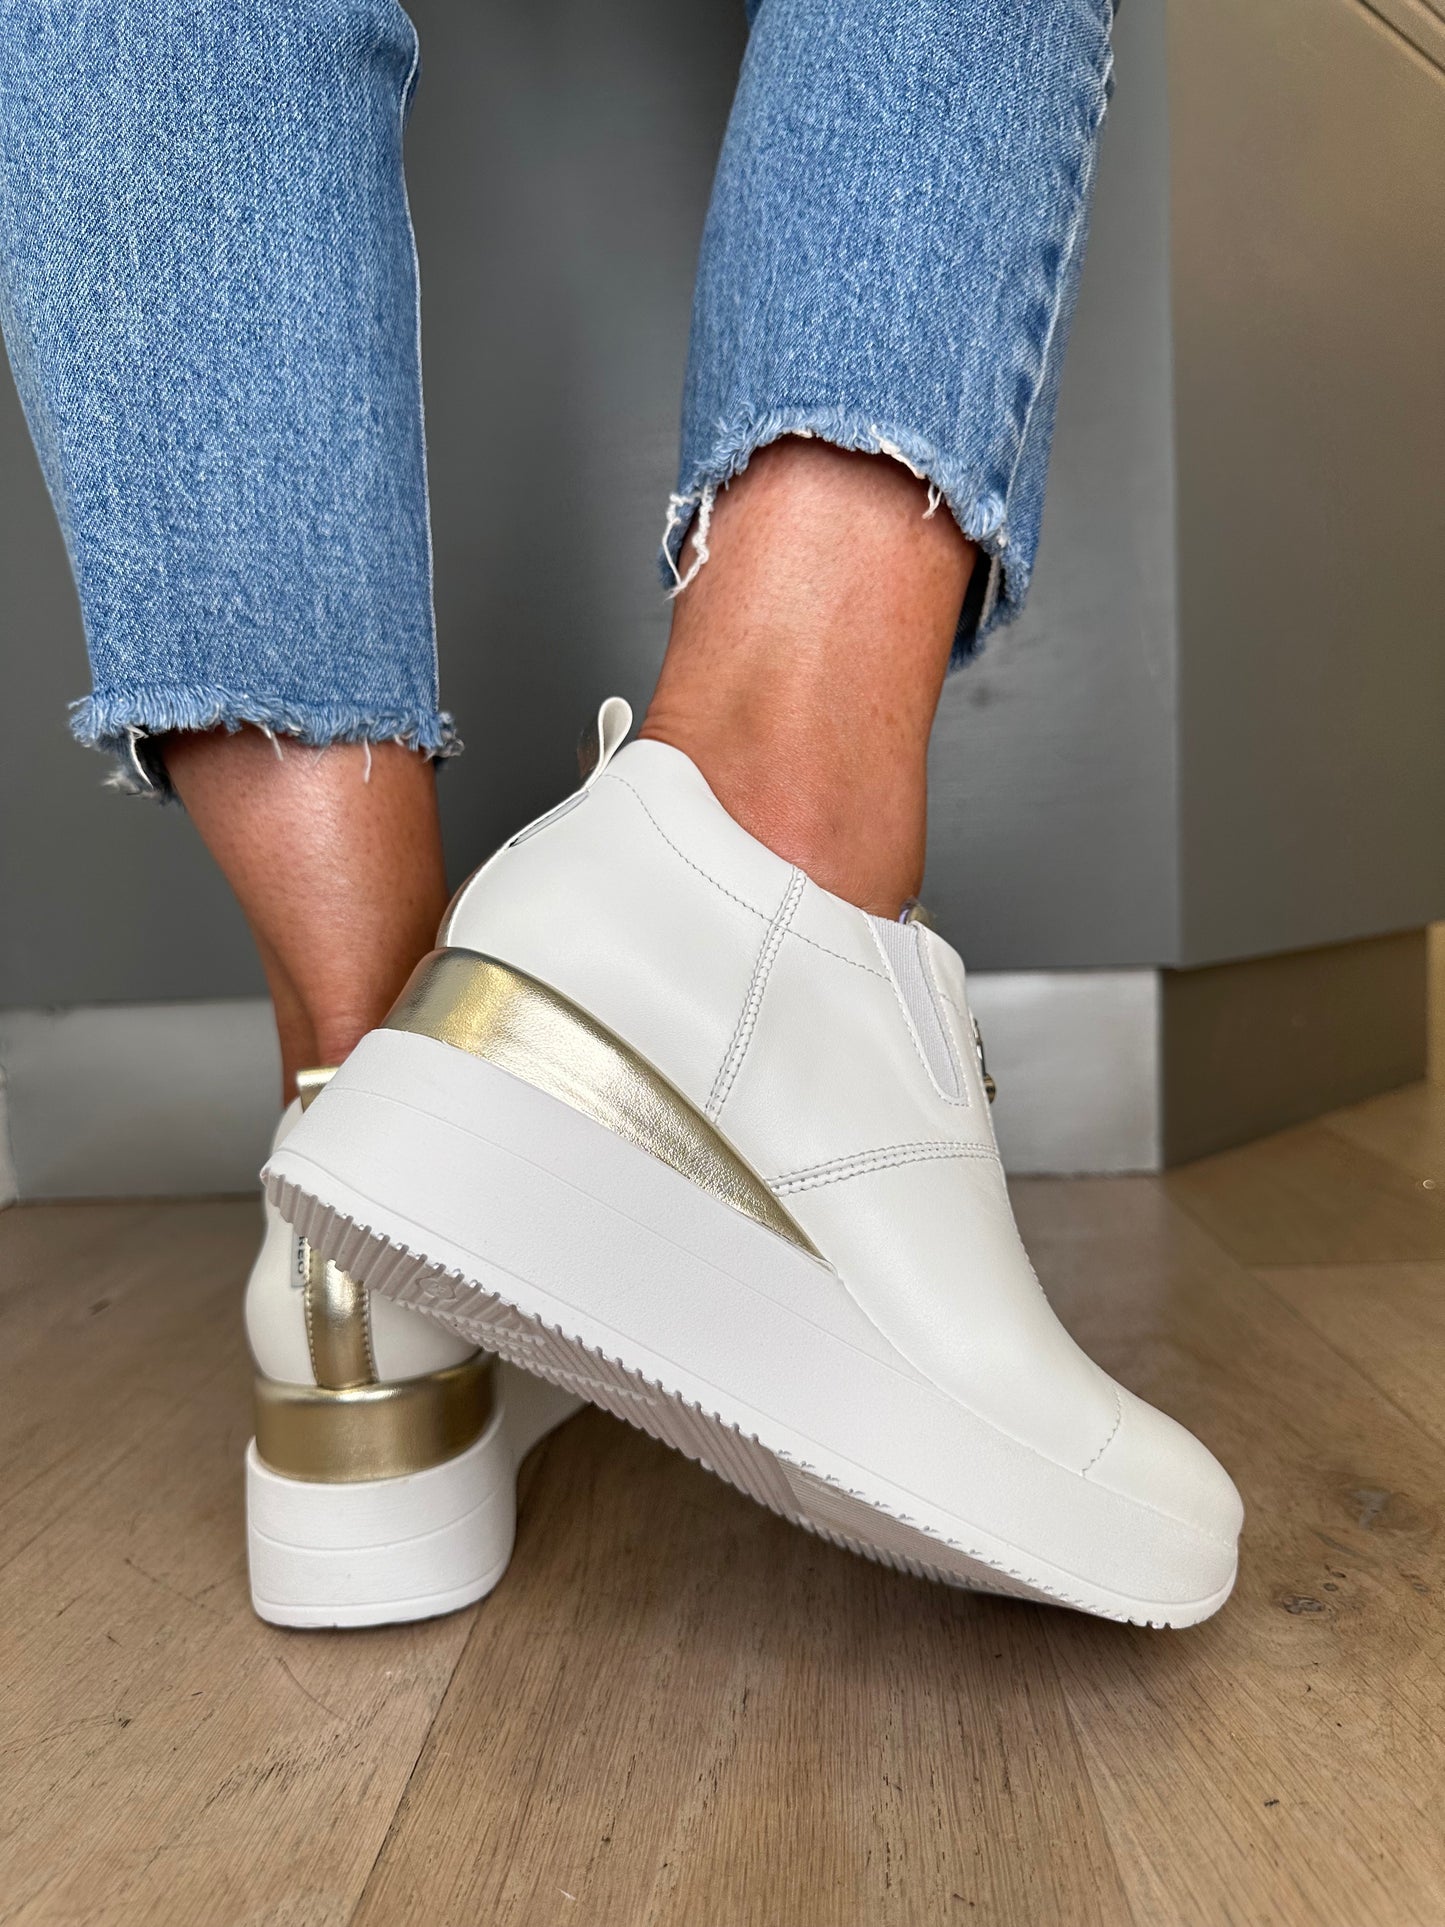 Marco Moreo - Marlies White Zip Up Shoe With A Wedge Sole And Soft Gold/Silver Trim